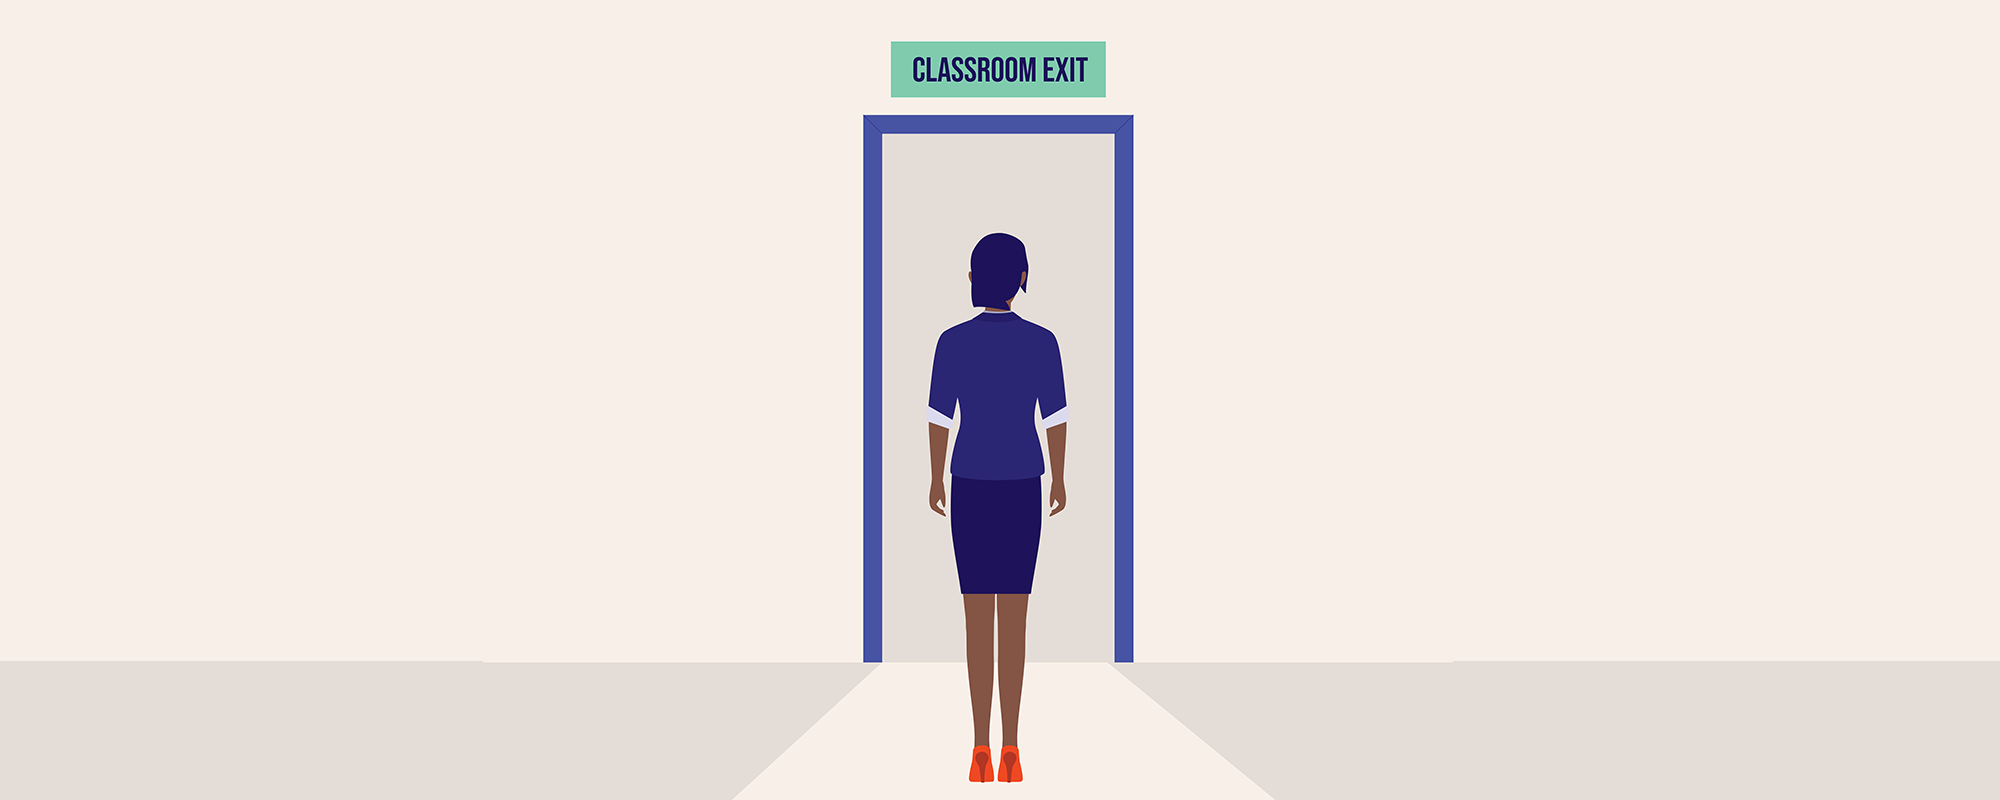 Illustration of a woman in a purple outfit walking toward a door that says "Classroom exit" above the frame.